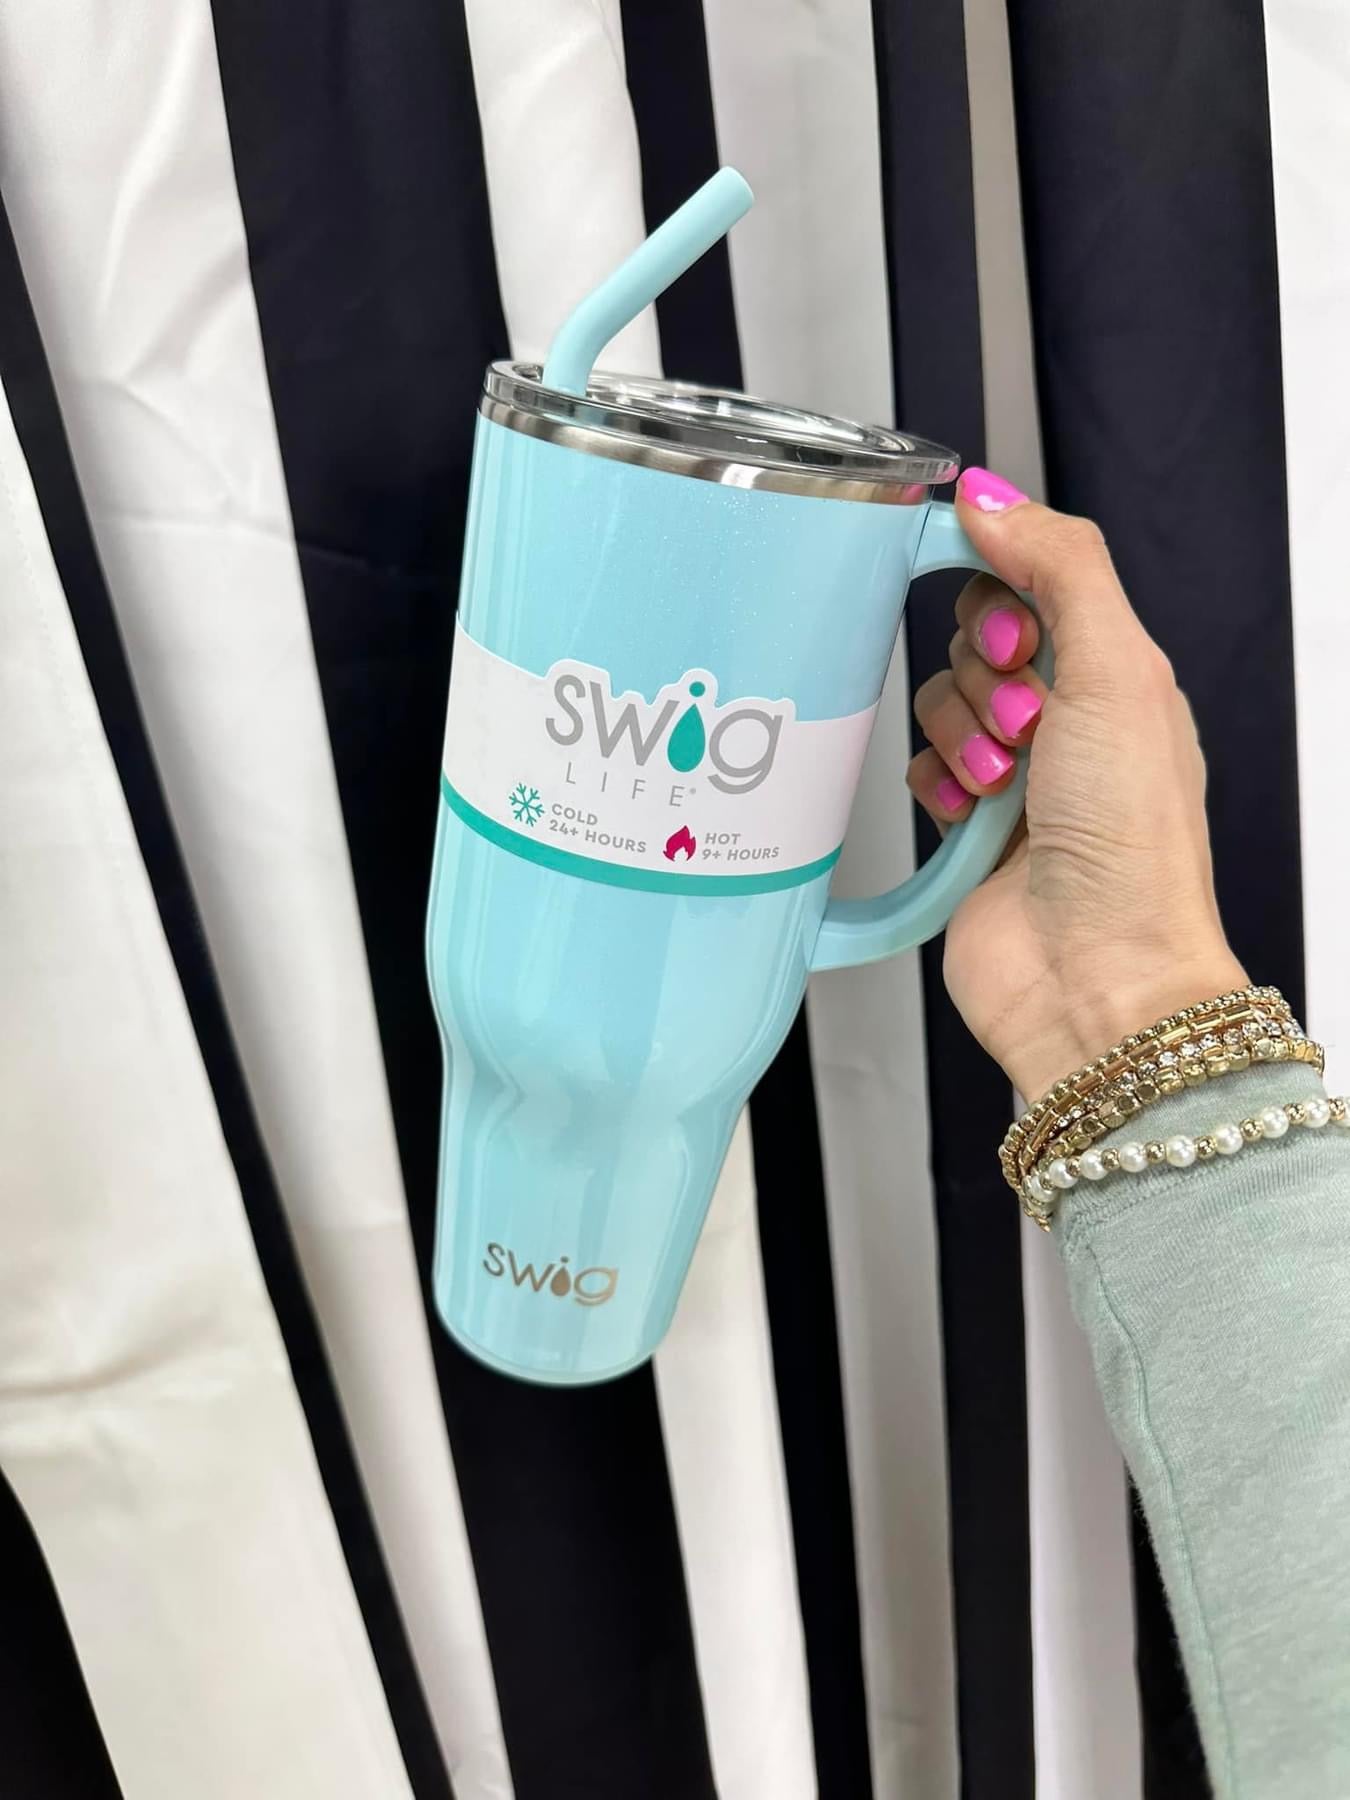 Swig Insulated Cup